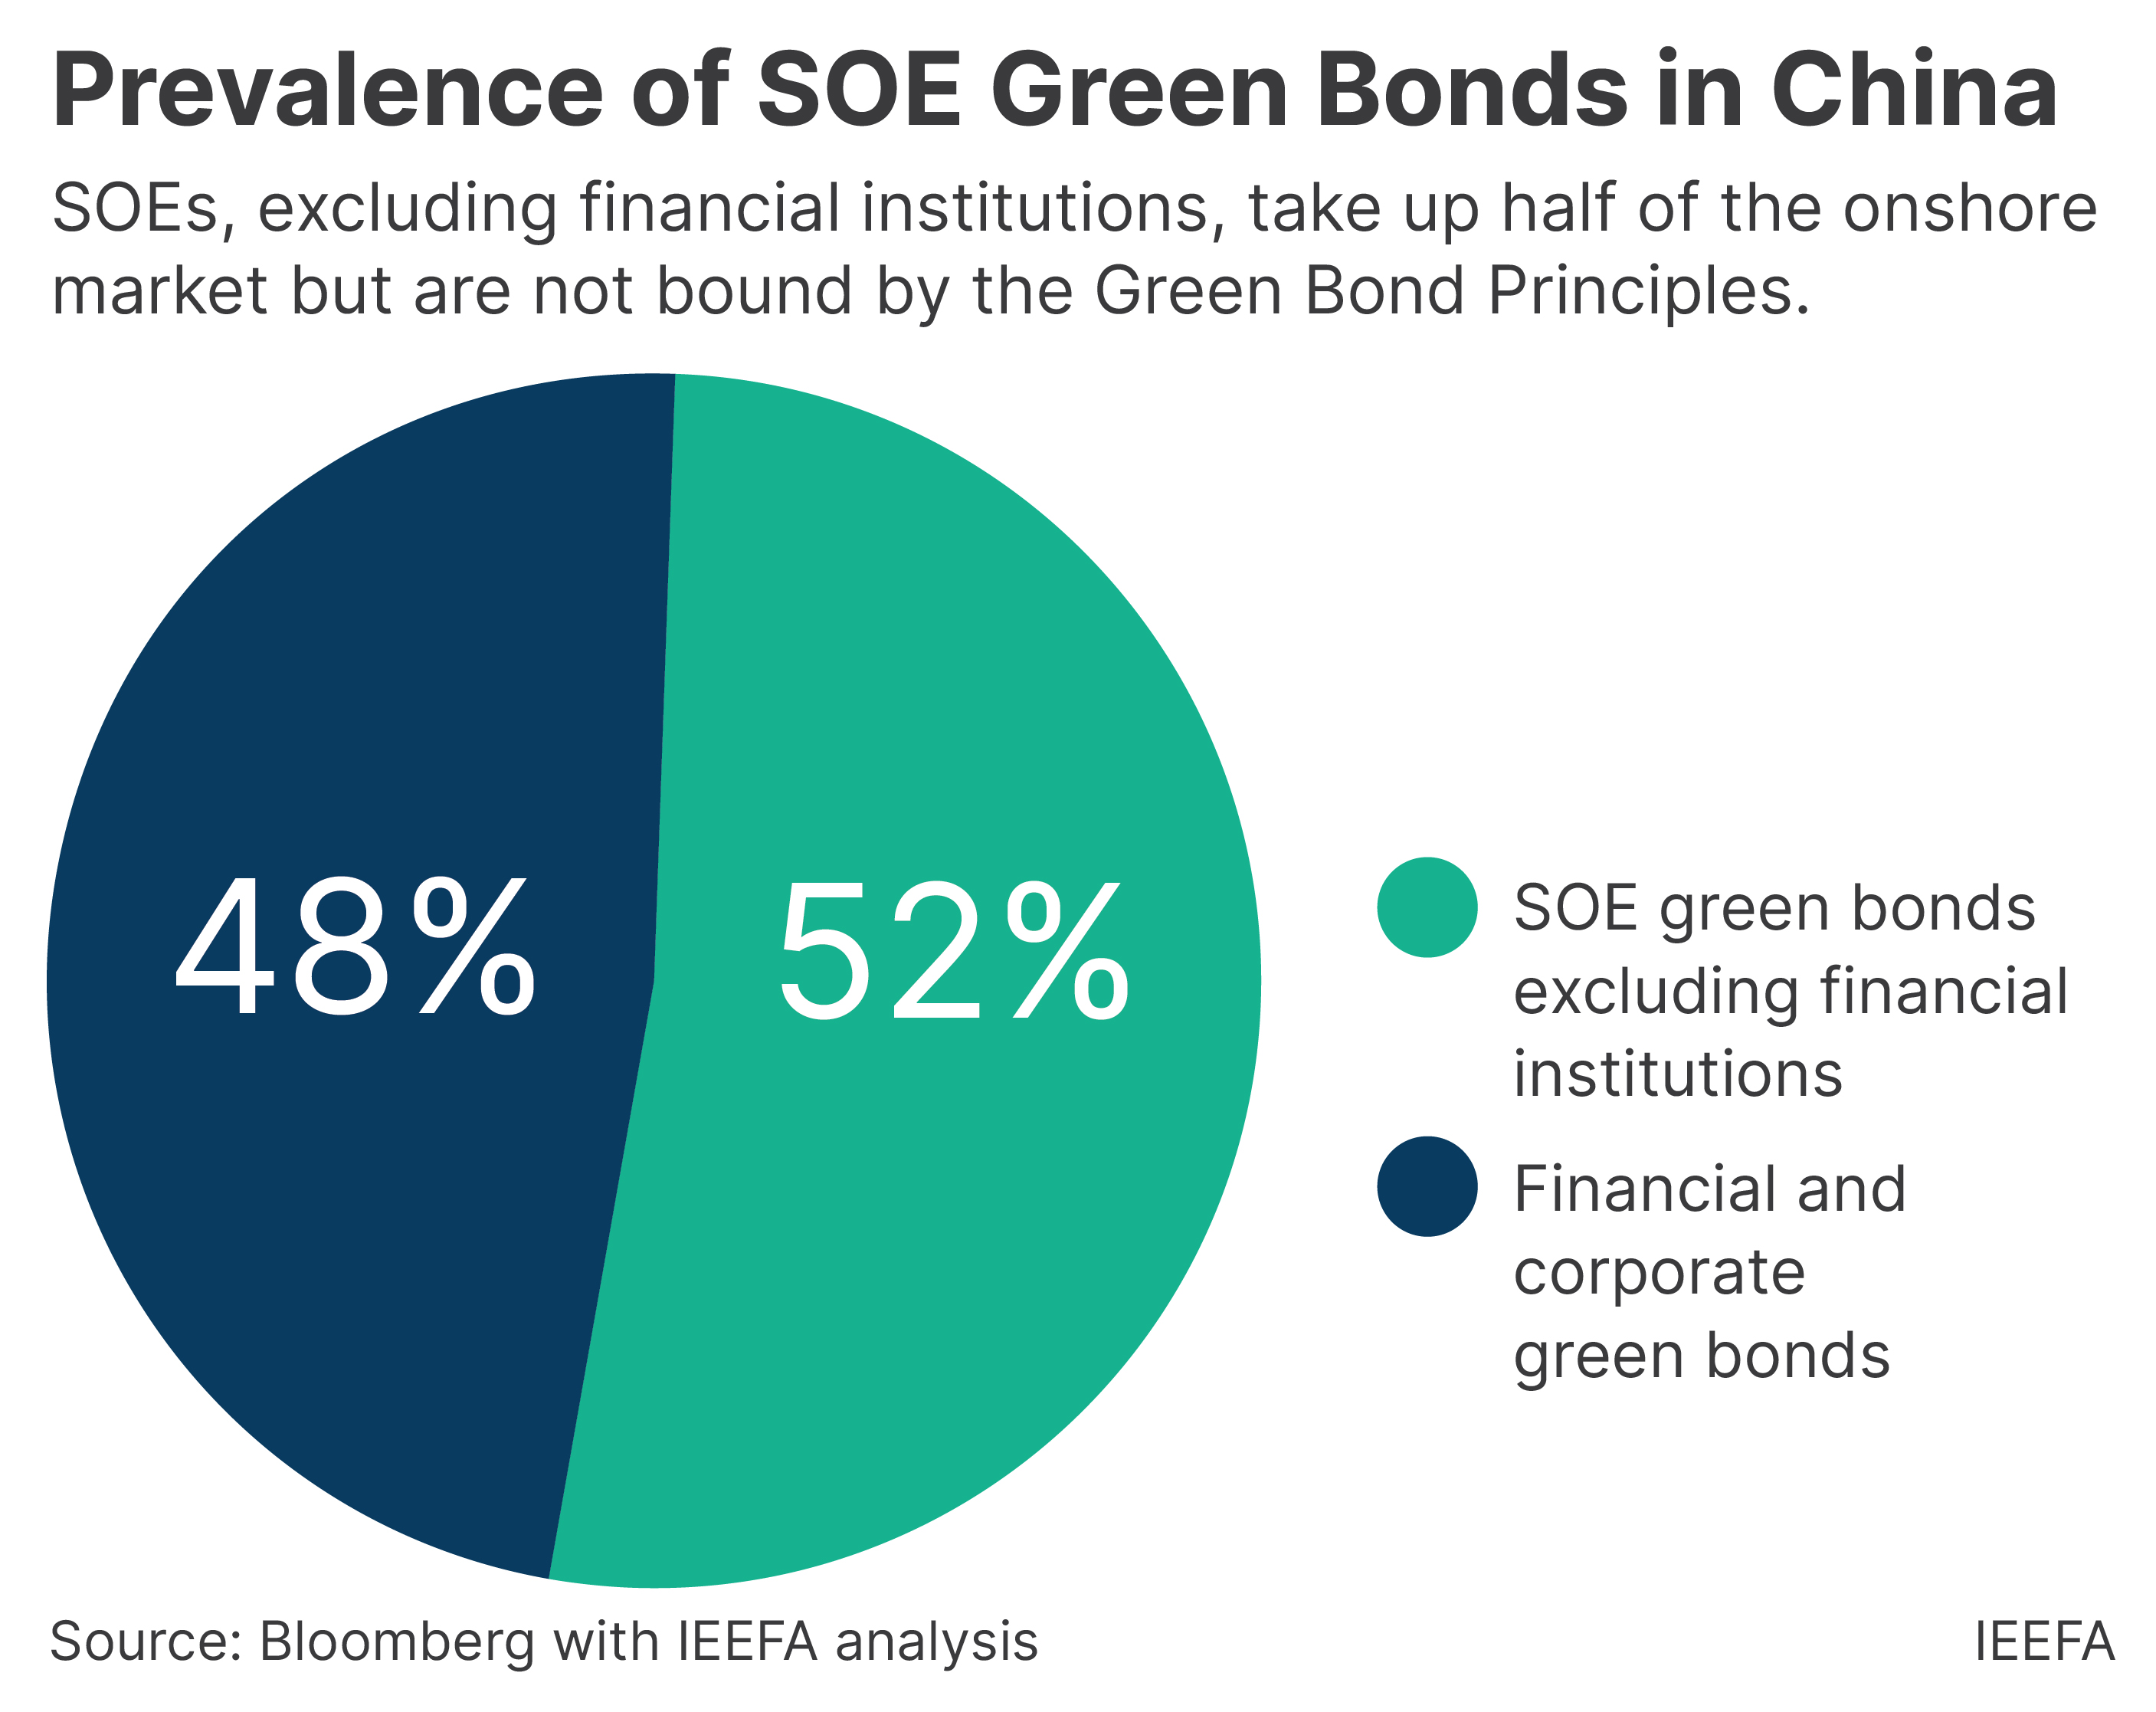 China is building a more credible green finance market but state-owned enterprises’ green bonds are in the way